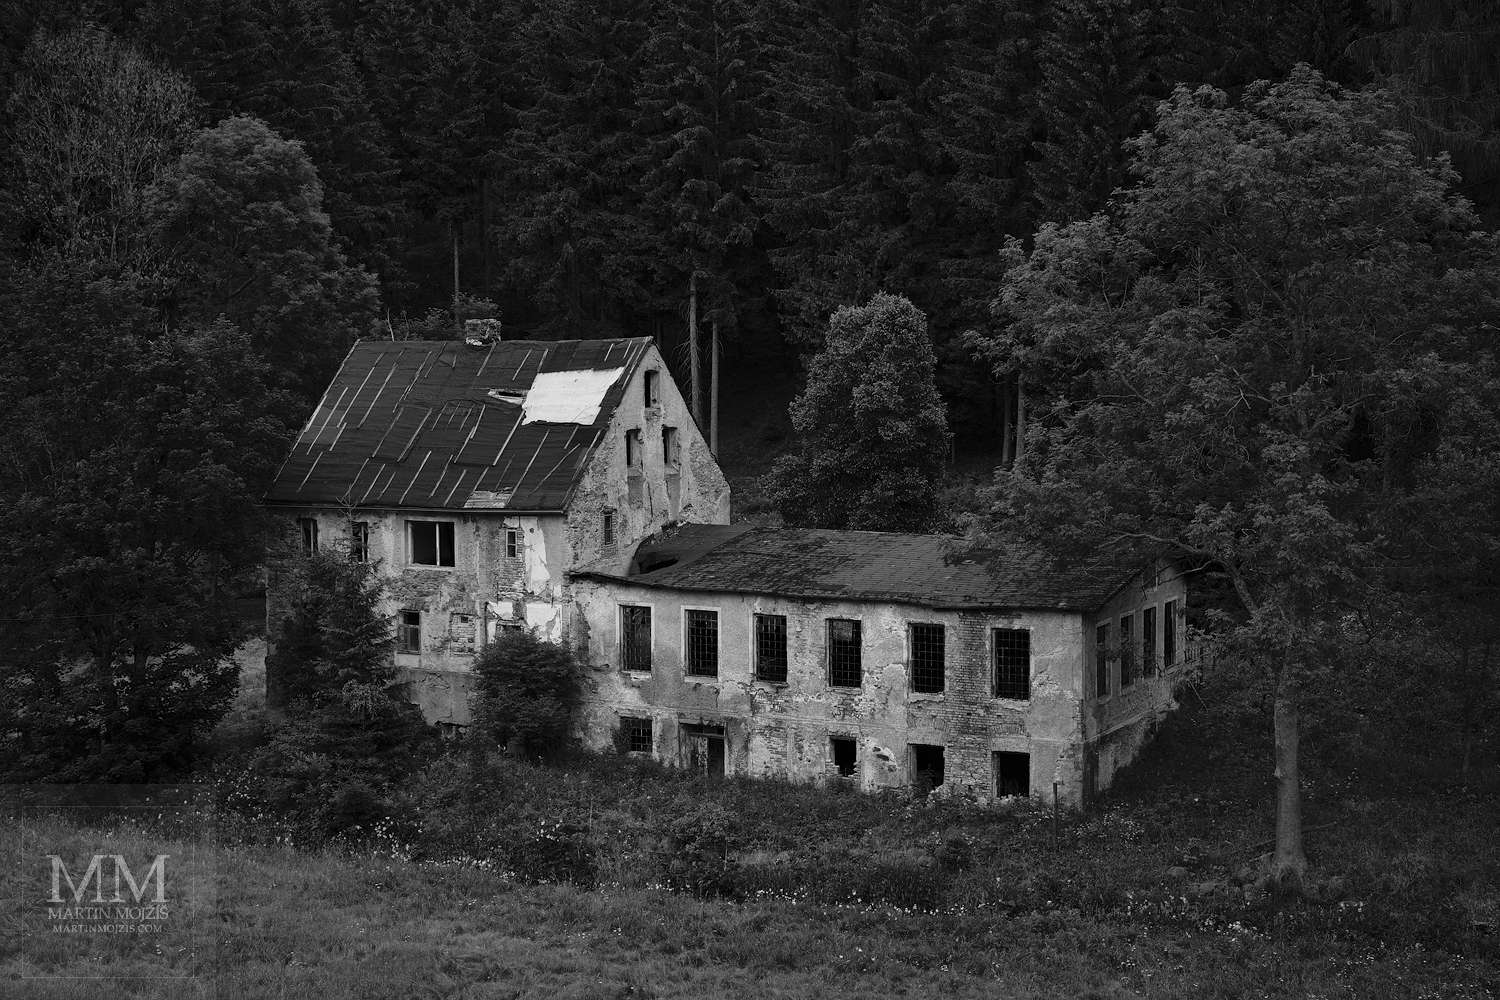 Dilapidated house among the trees.